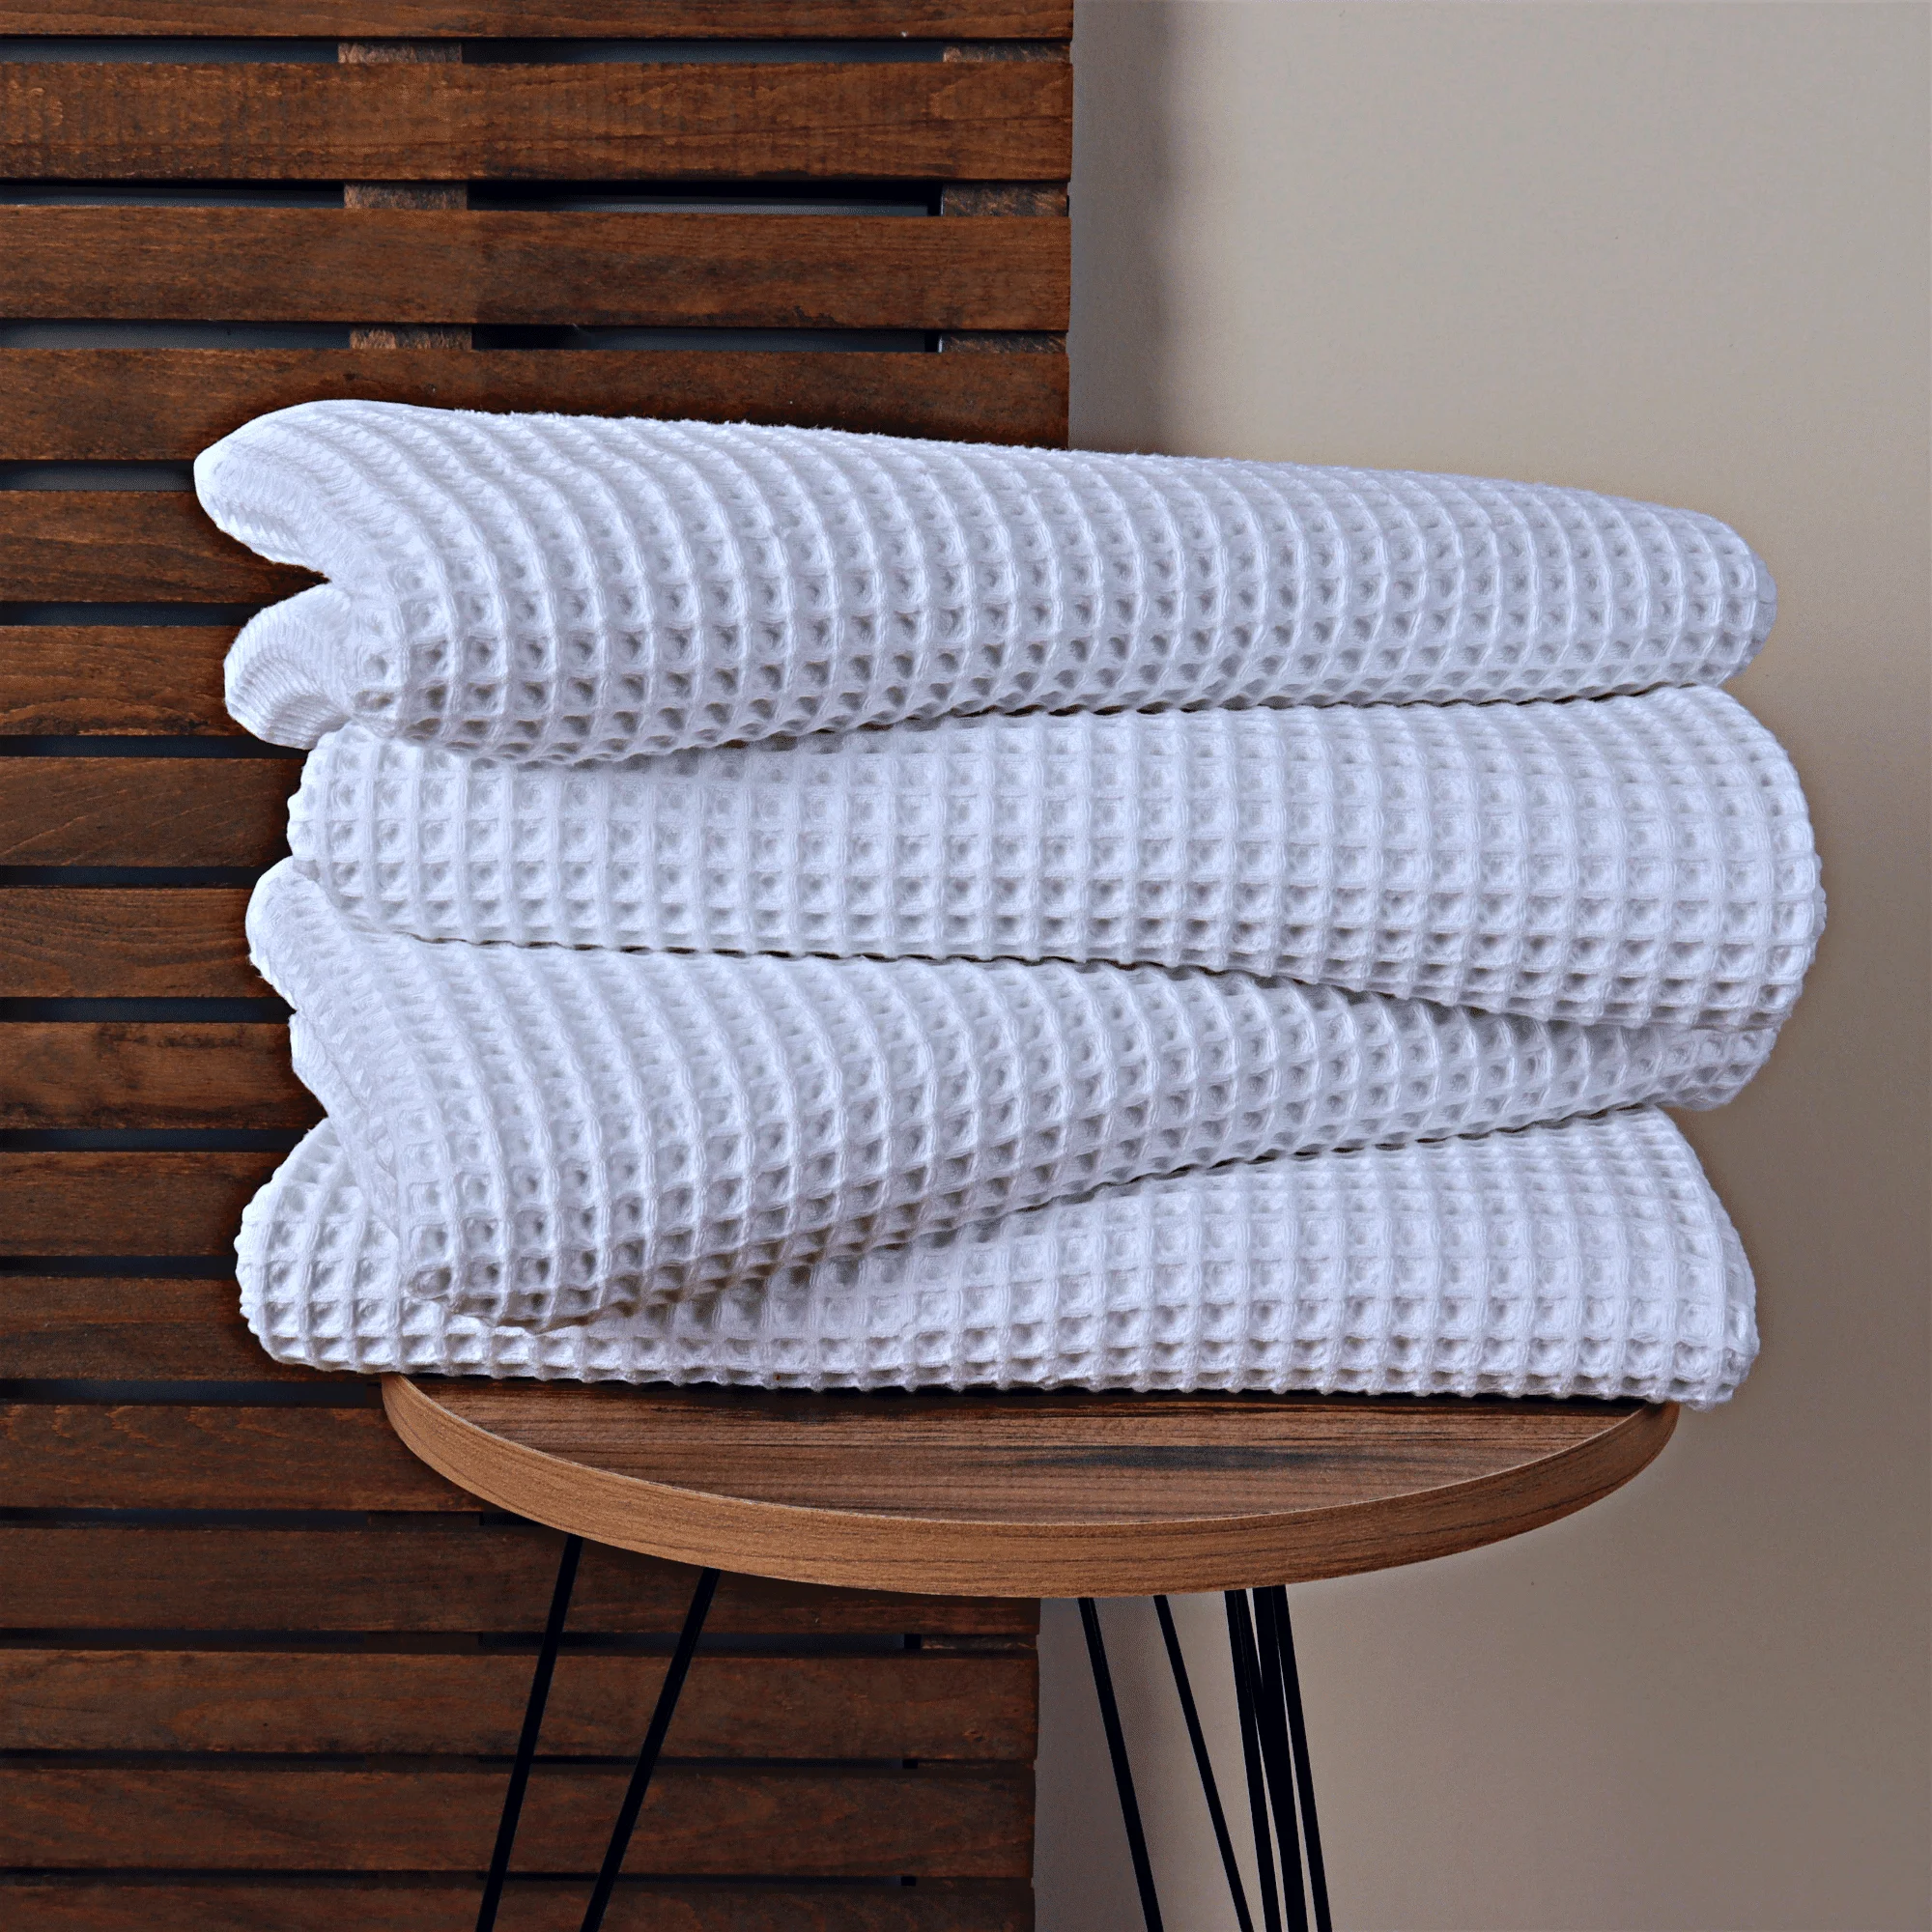 https://ae01.alicdn.com/kf/Ae97de5366df04f20a2e14acff11d5d7dl/Luxury-Waffle-Towels-Premium-Turkish-Organic-Cotton-Honeycomb-Weave-Linen-for-Bathroom-Durable-Absorbent-High-Quality.png